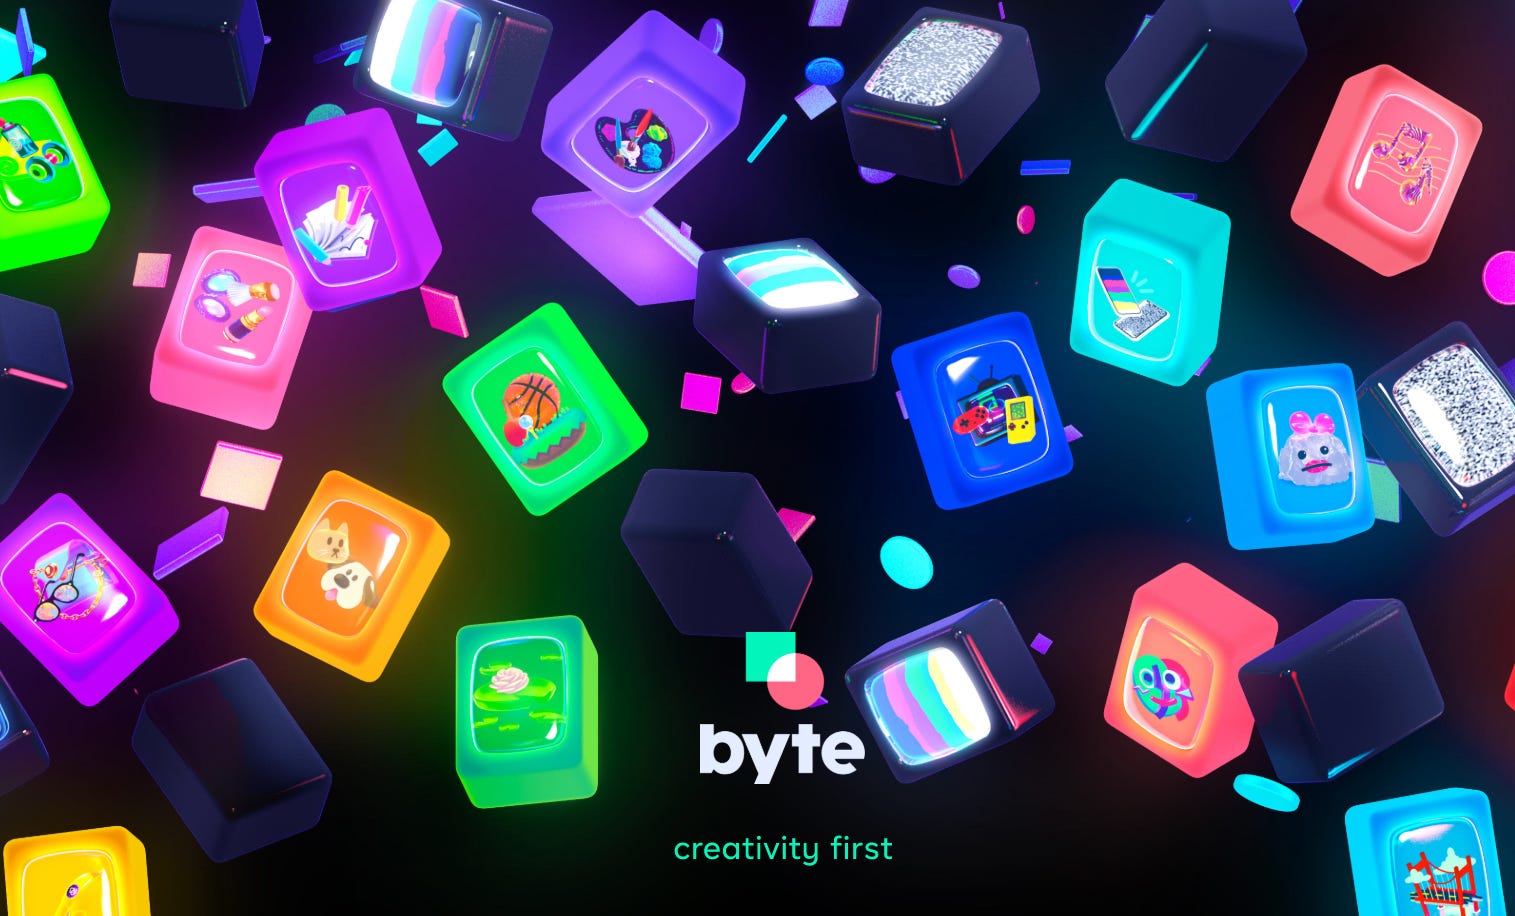 There, I Said It: As It Stands, Byte Is Unlikely To Beat TikTok At Its Own Game